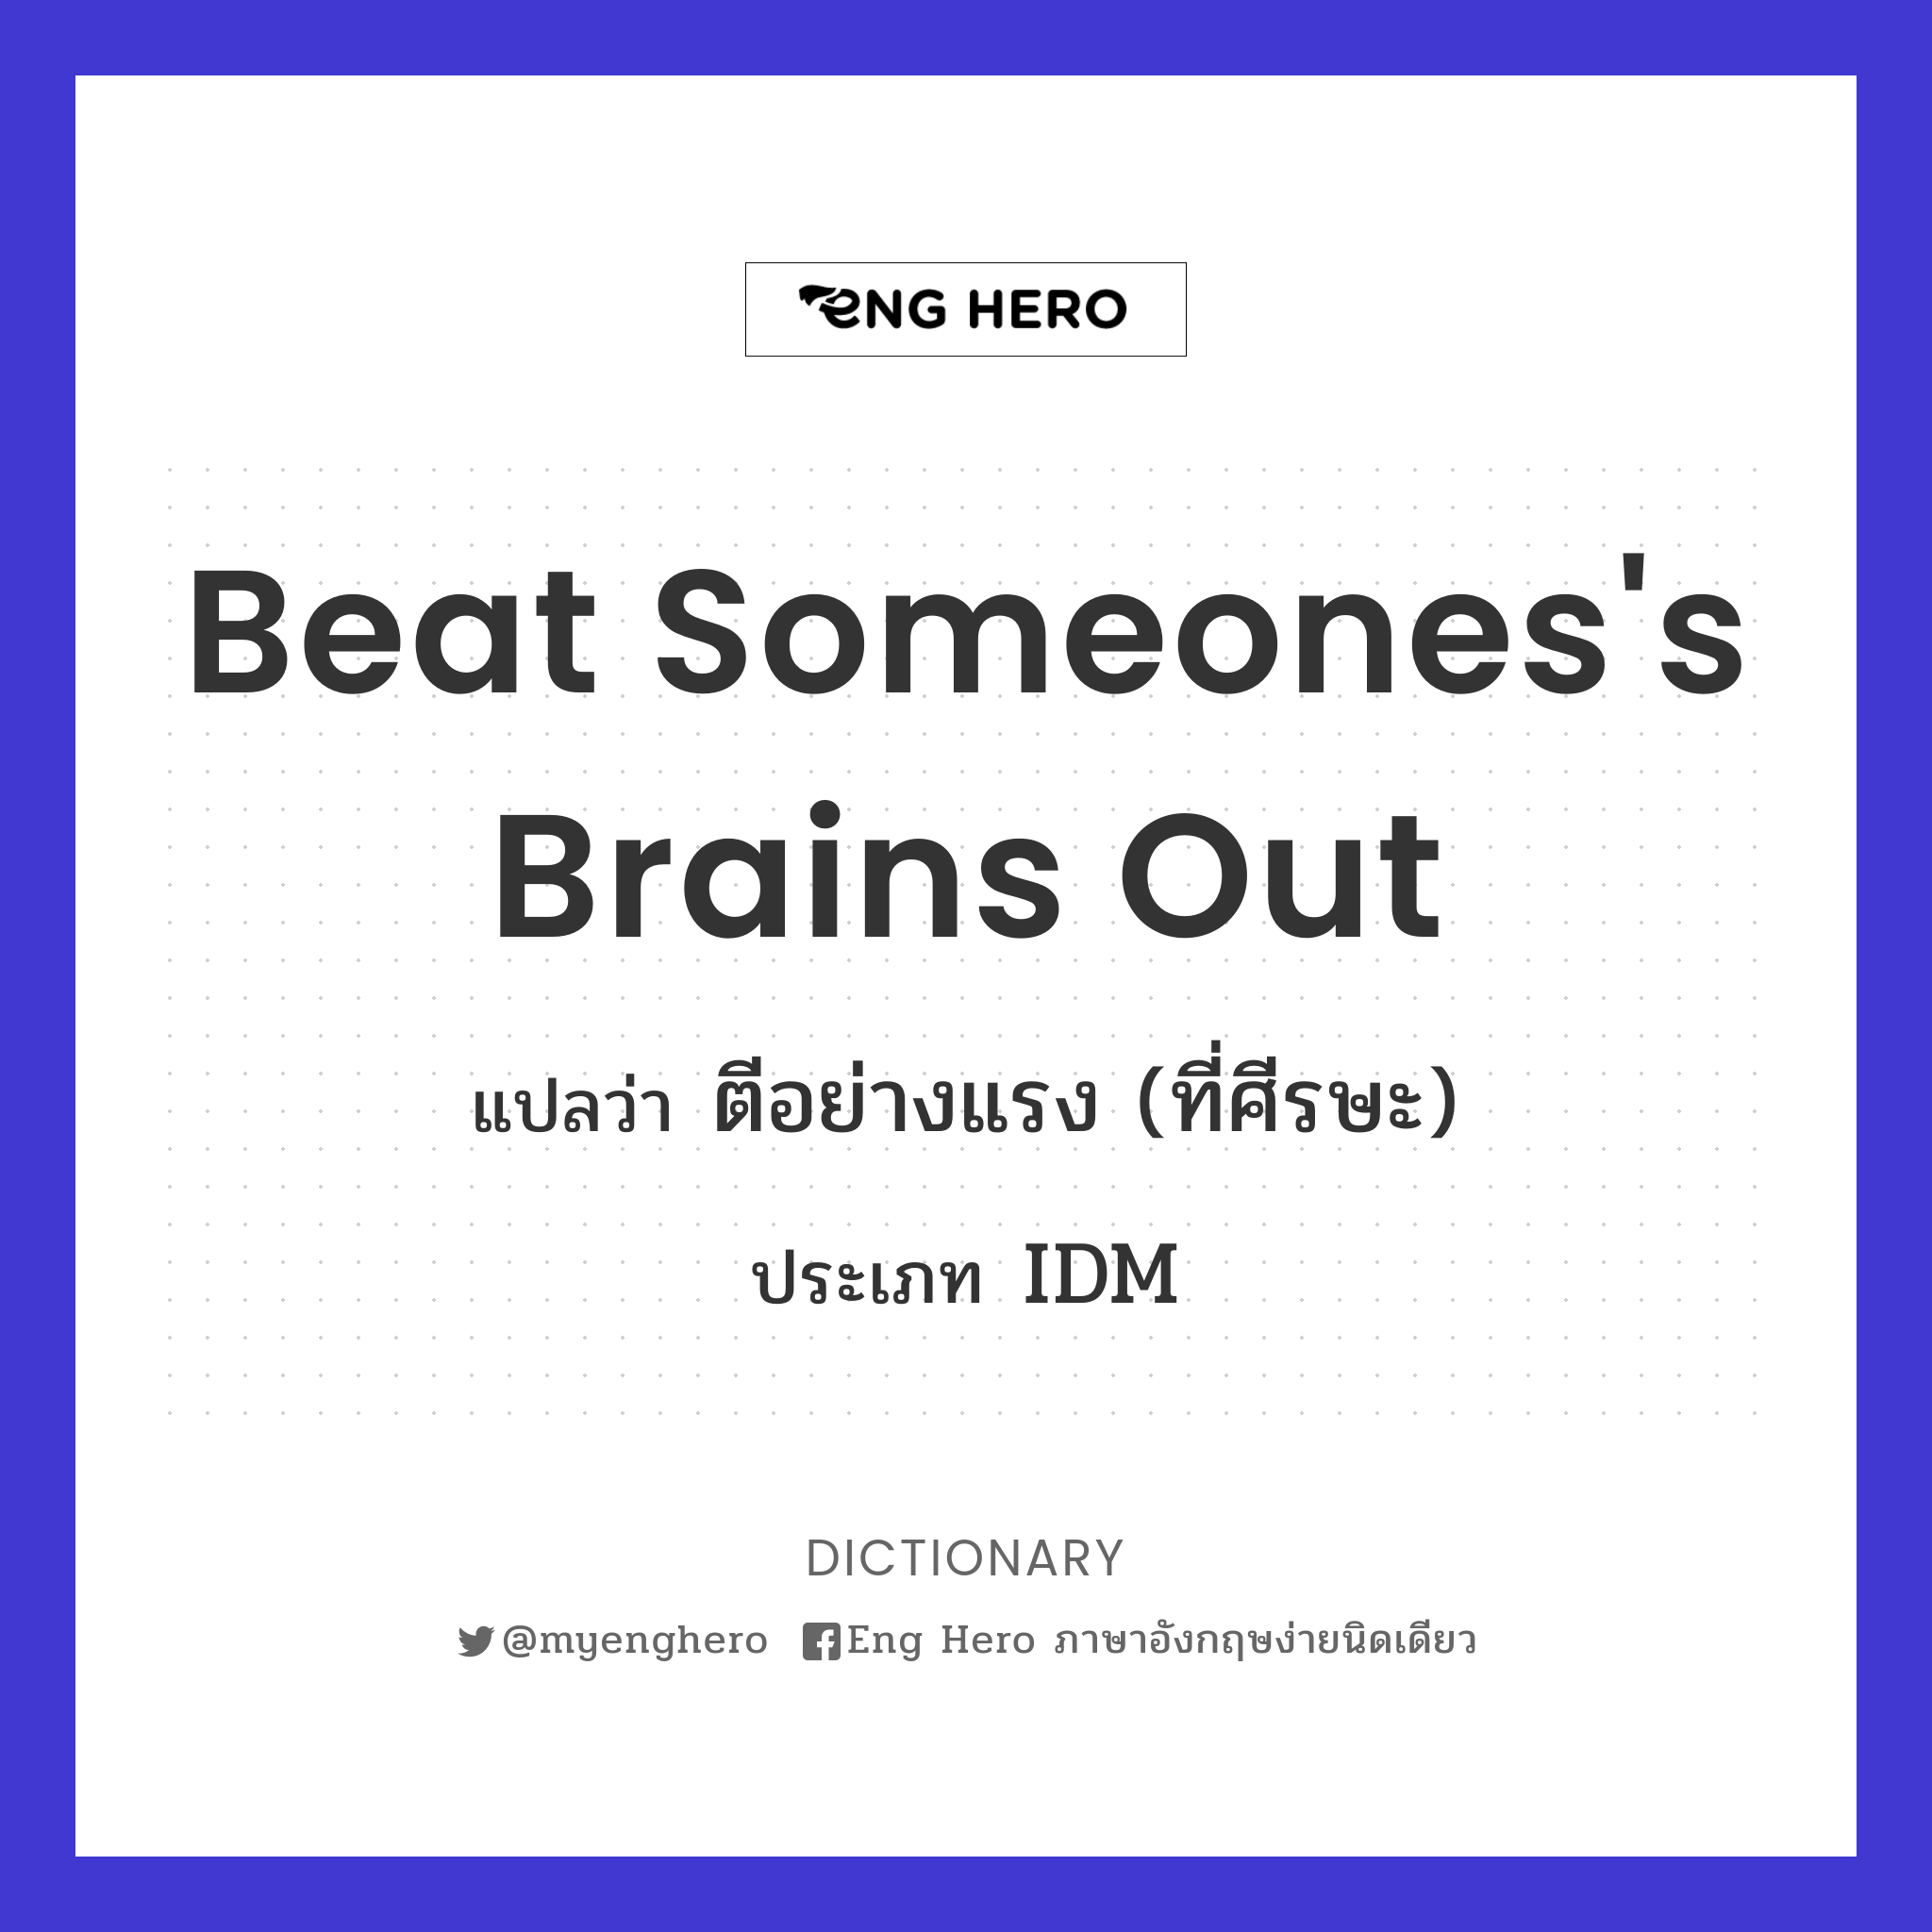 beat someones's brains out